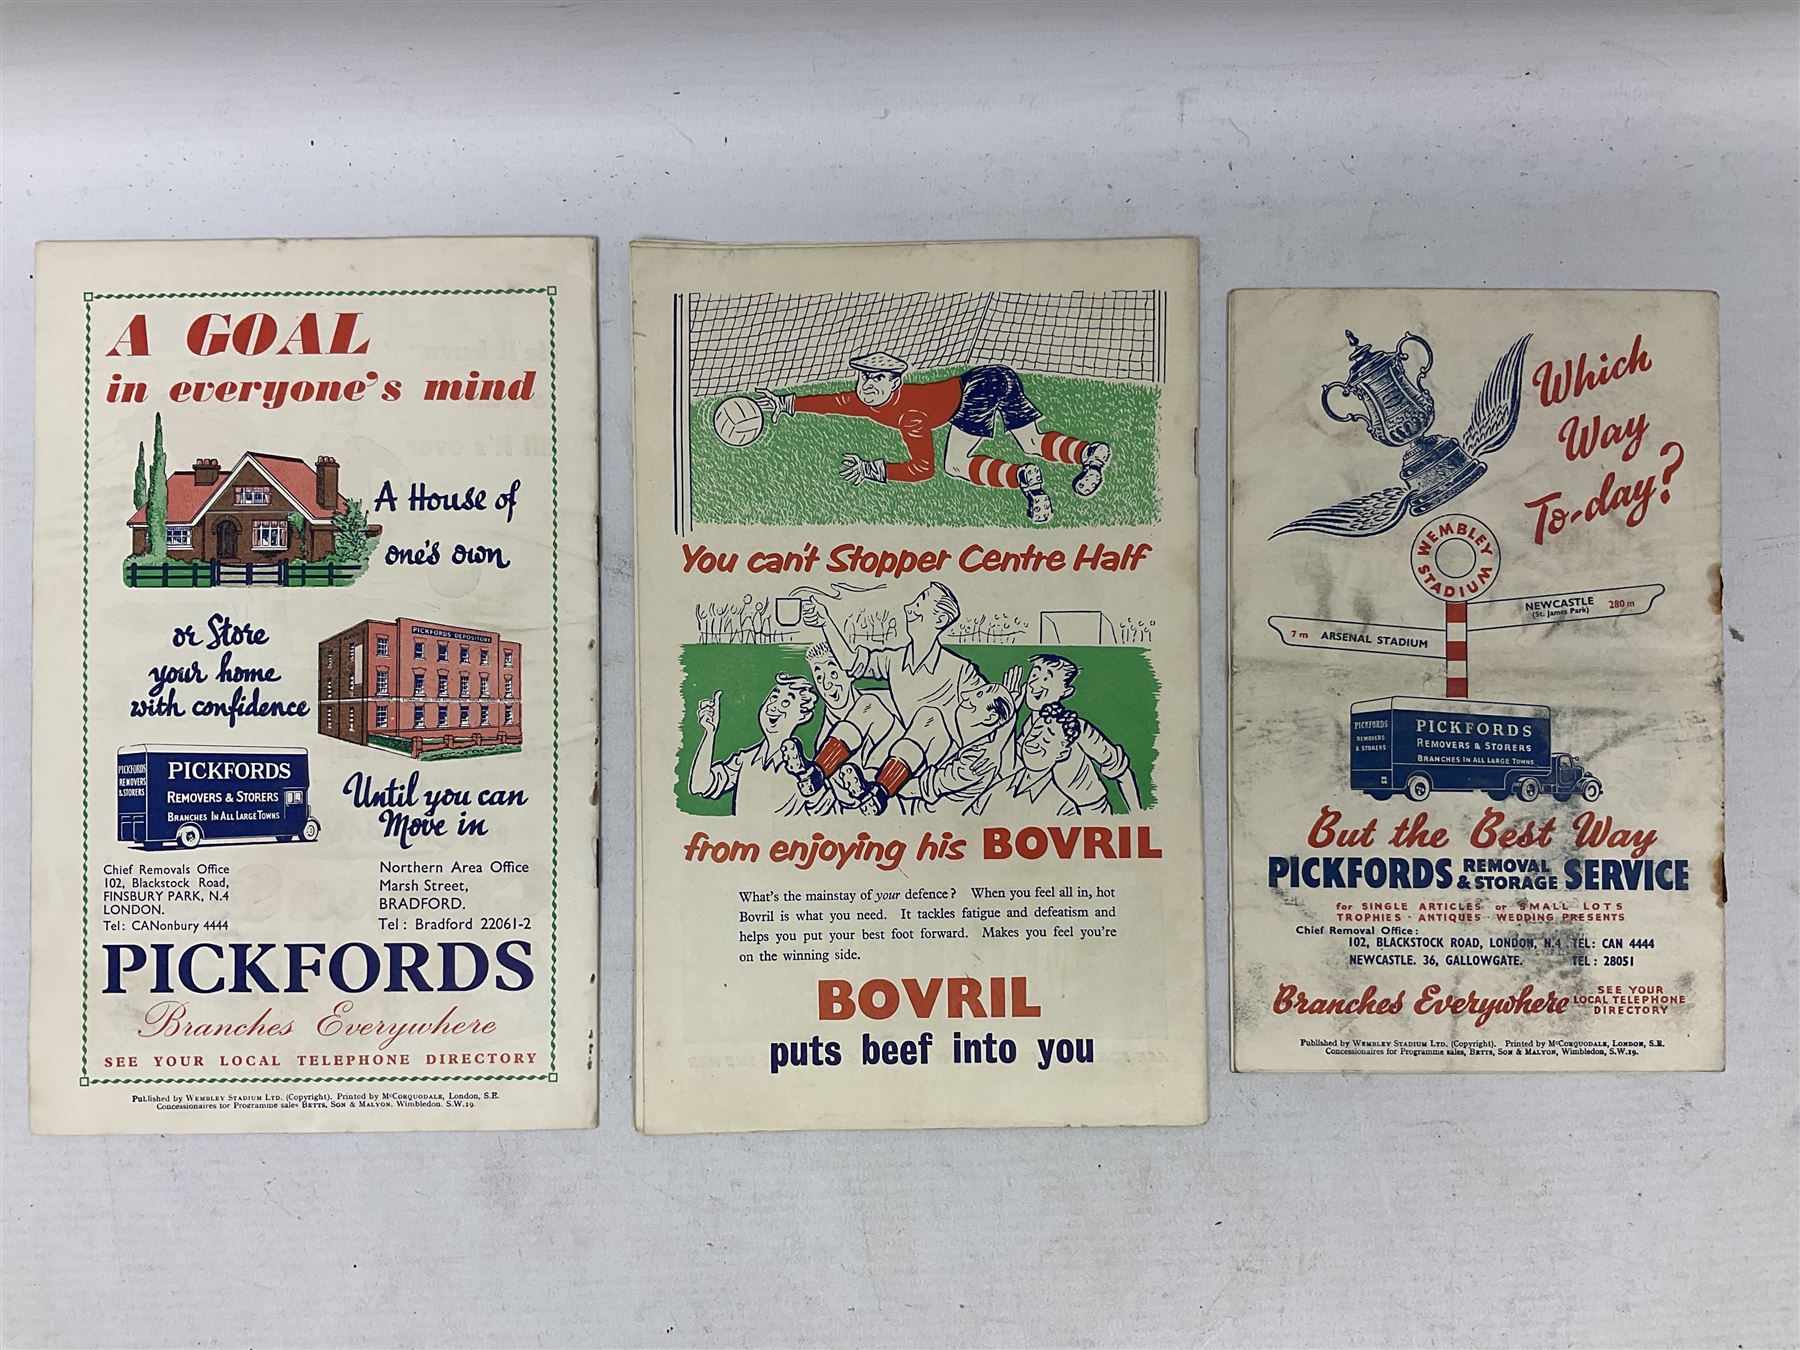 Three F.A. Cup Final programmes at Wembley - 1952 Arsenal v Newcastle United played on May 3rd; 1953 - Image 2 of 11